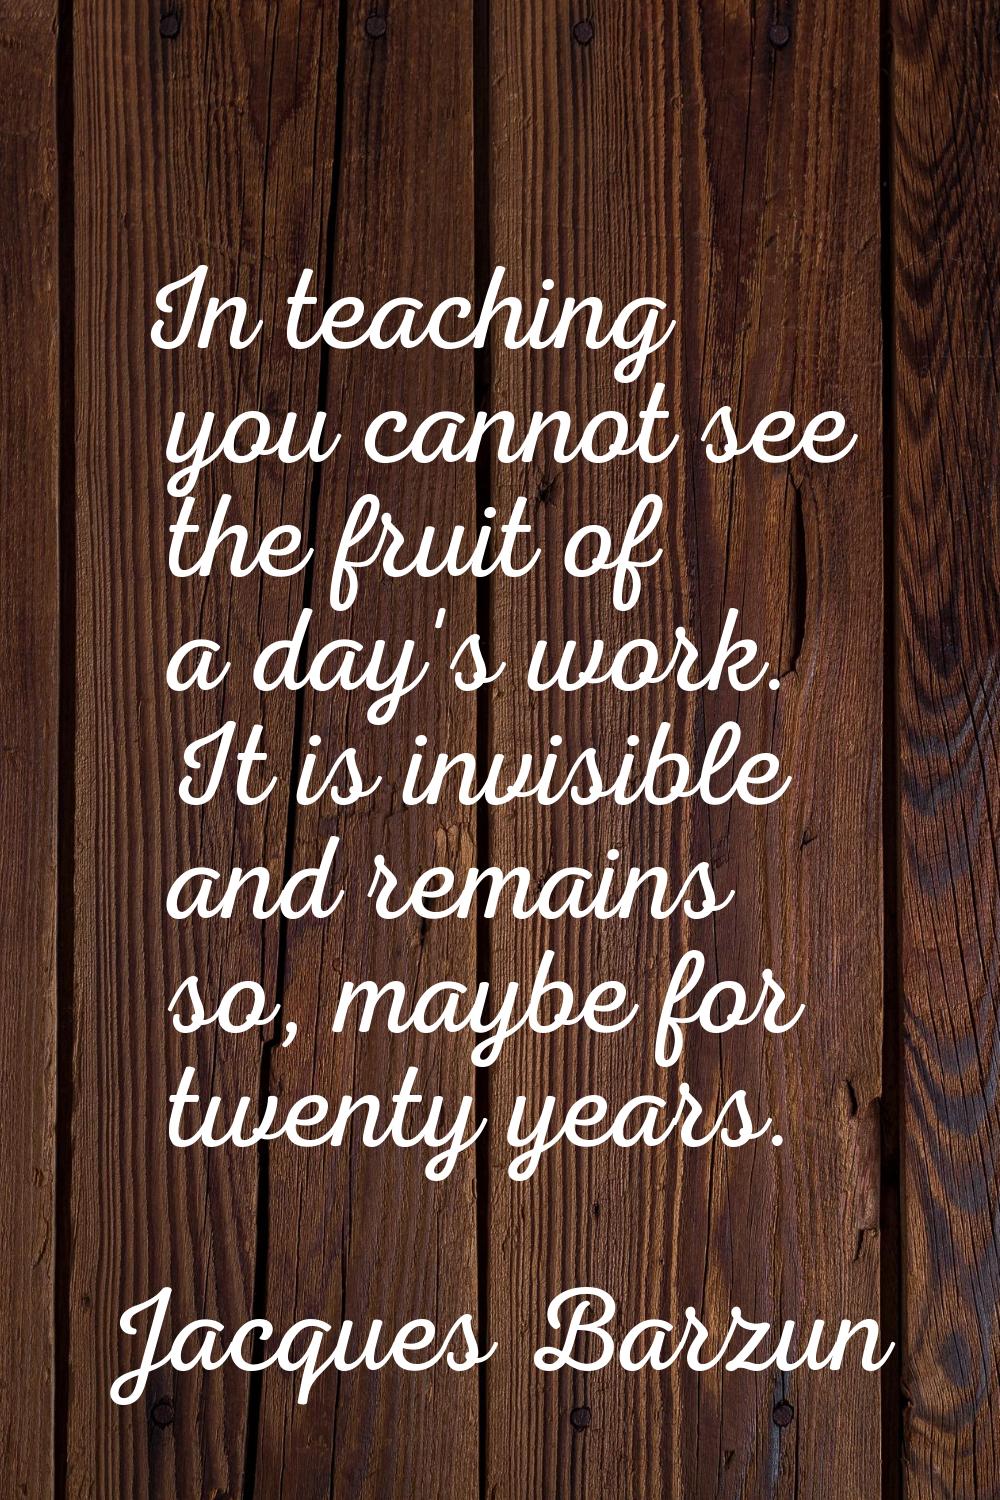 In teaching you cannot see the fruit of a day's work. It is invisible and remains so, maybe for twe